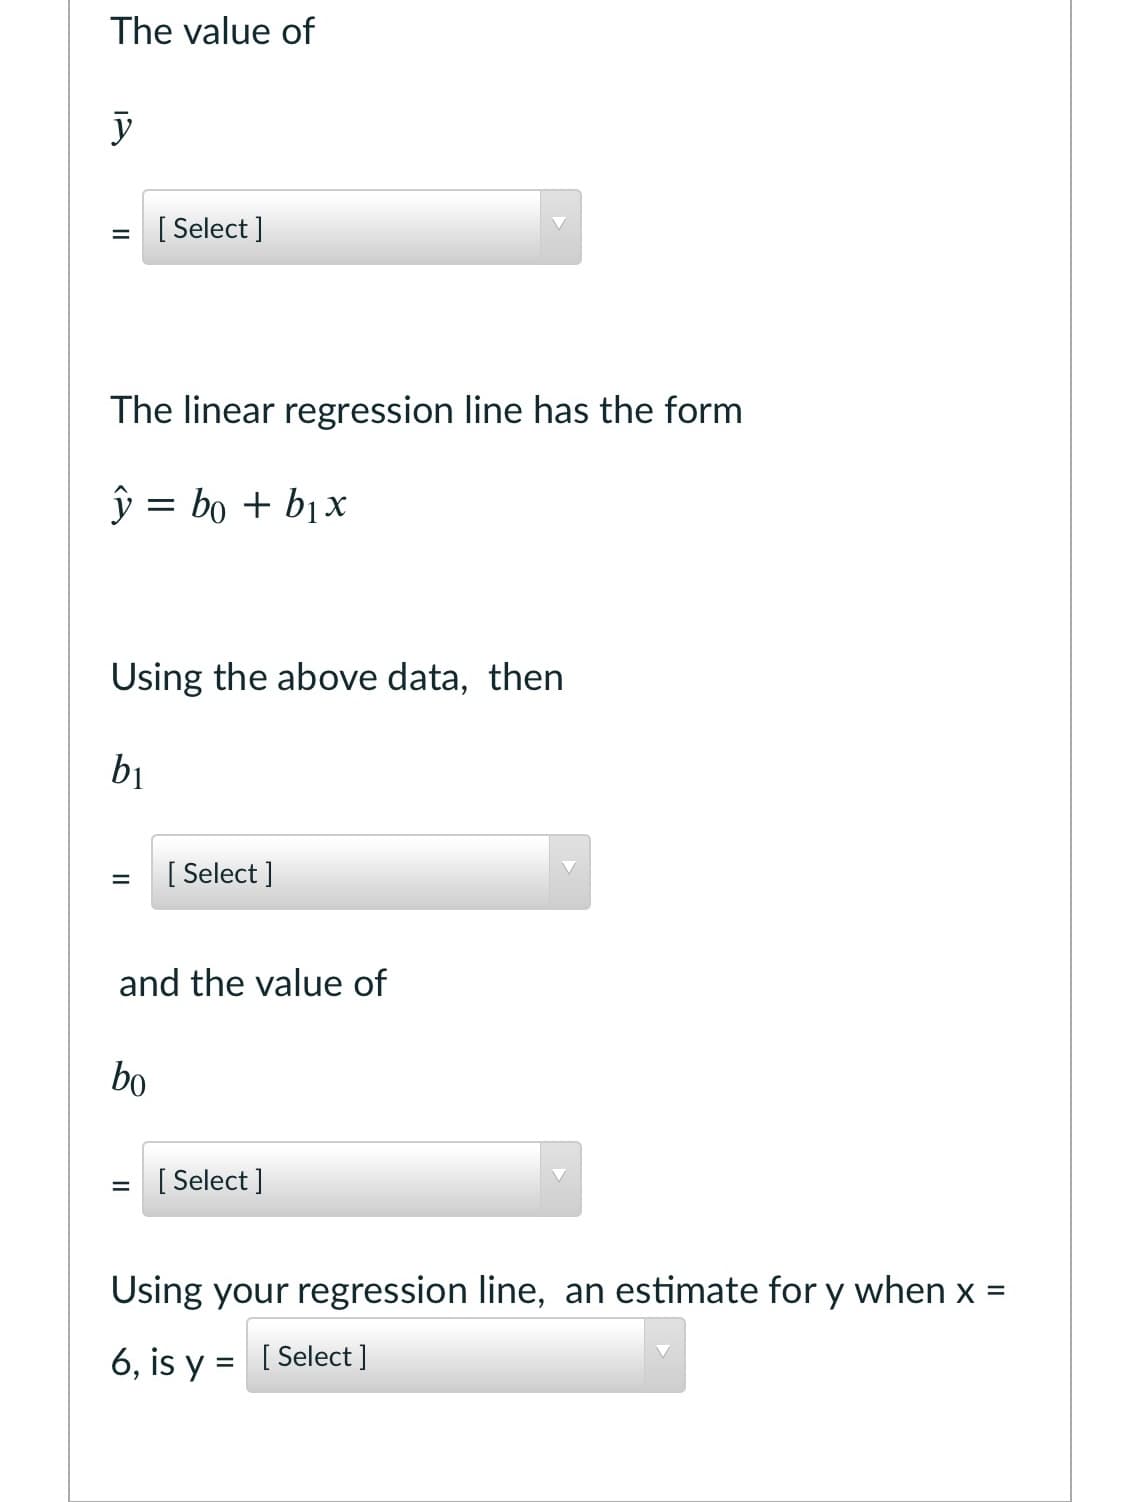 The value of
[ Select ]
The linear regression line has the form
ŷ = bo + bịx
Using the above data, then
bị
[
[ Select ]
and the value of
bo
= [ Select ]
Using your regression line, an estimate for y when x =
%3D
6, is y
= [ Select ]
